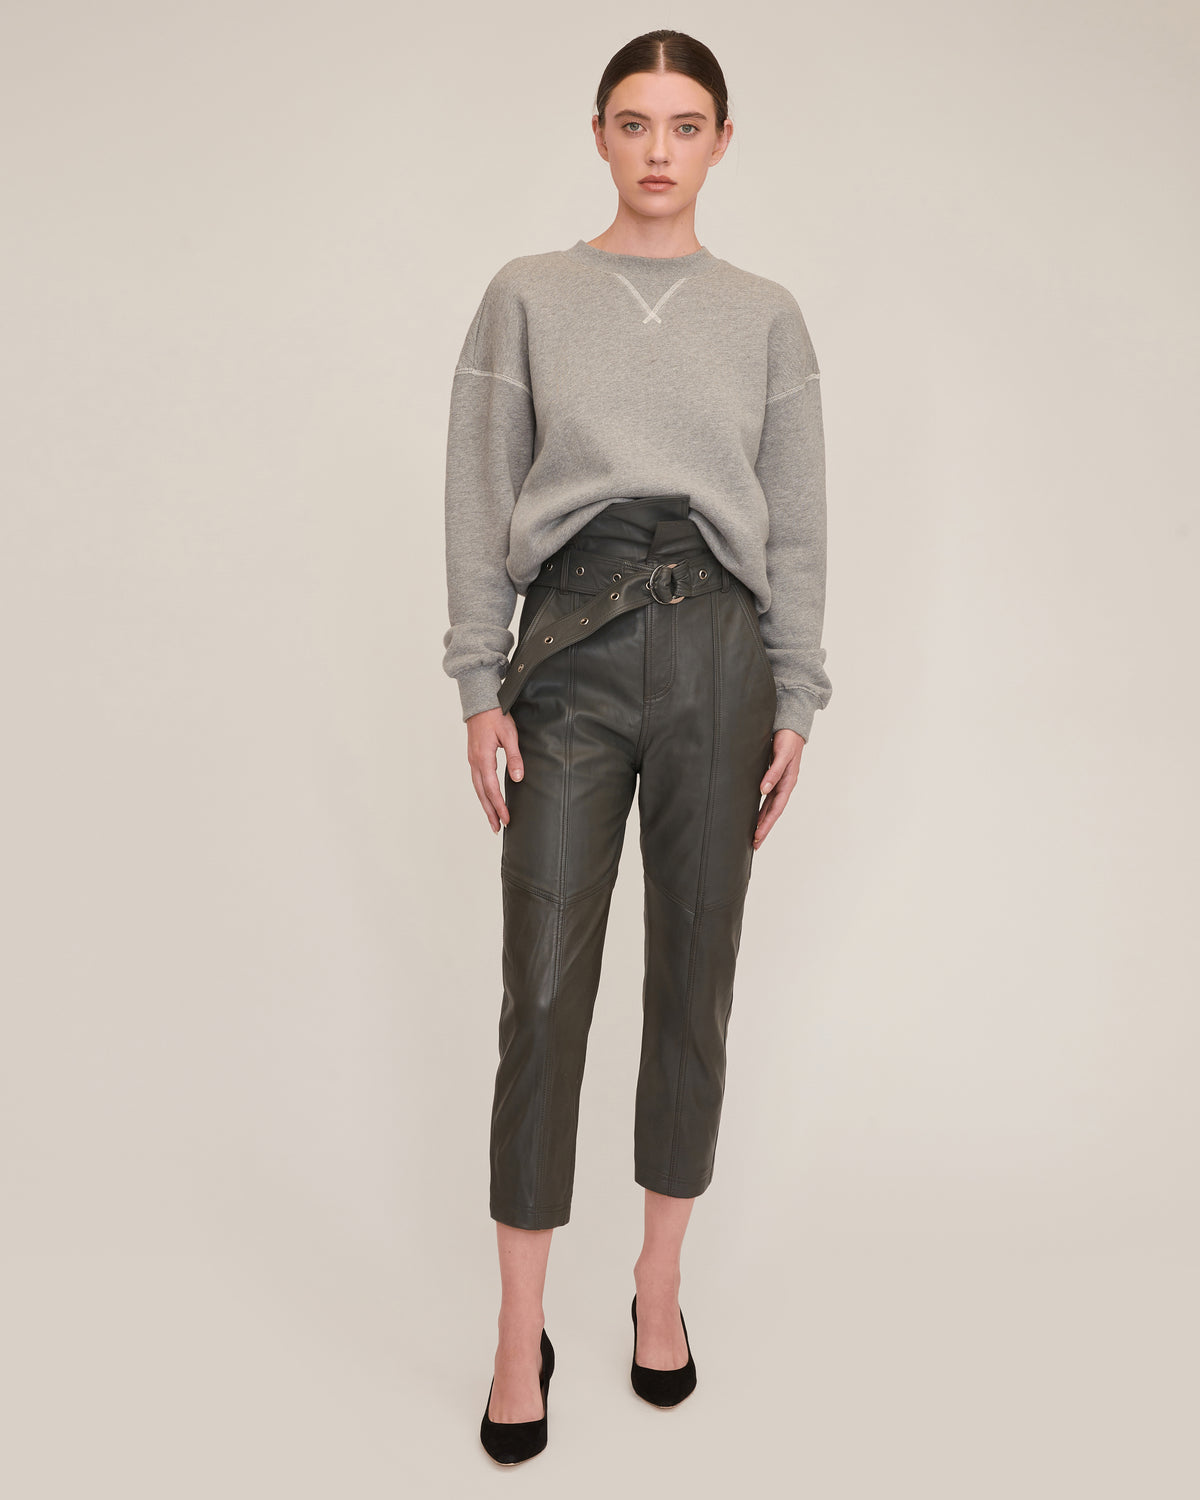 Anniston Leather Pant in Charcoal | MARISSA WEBB